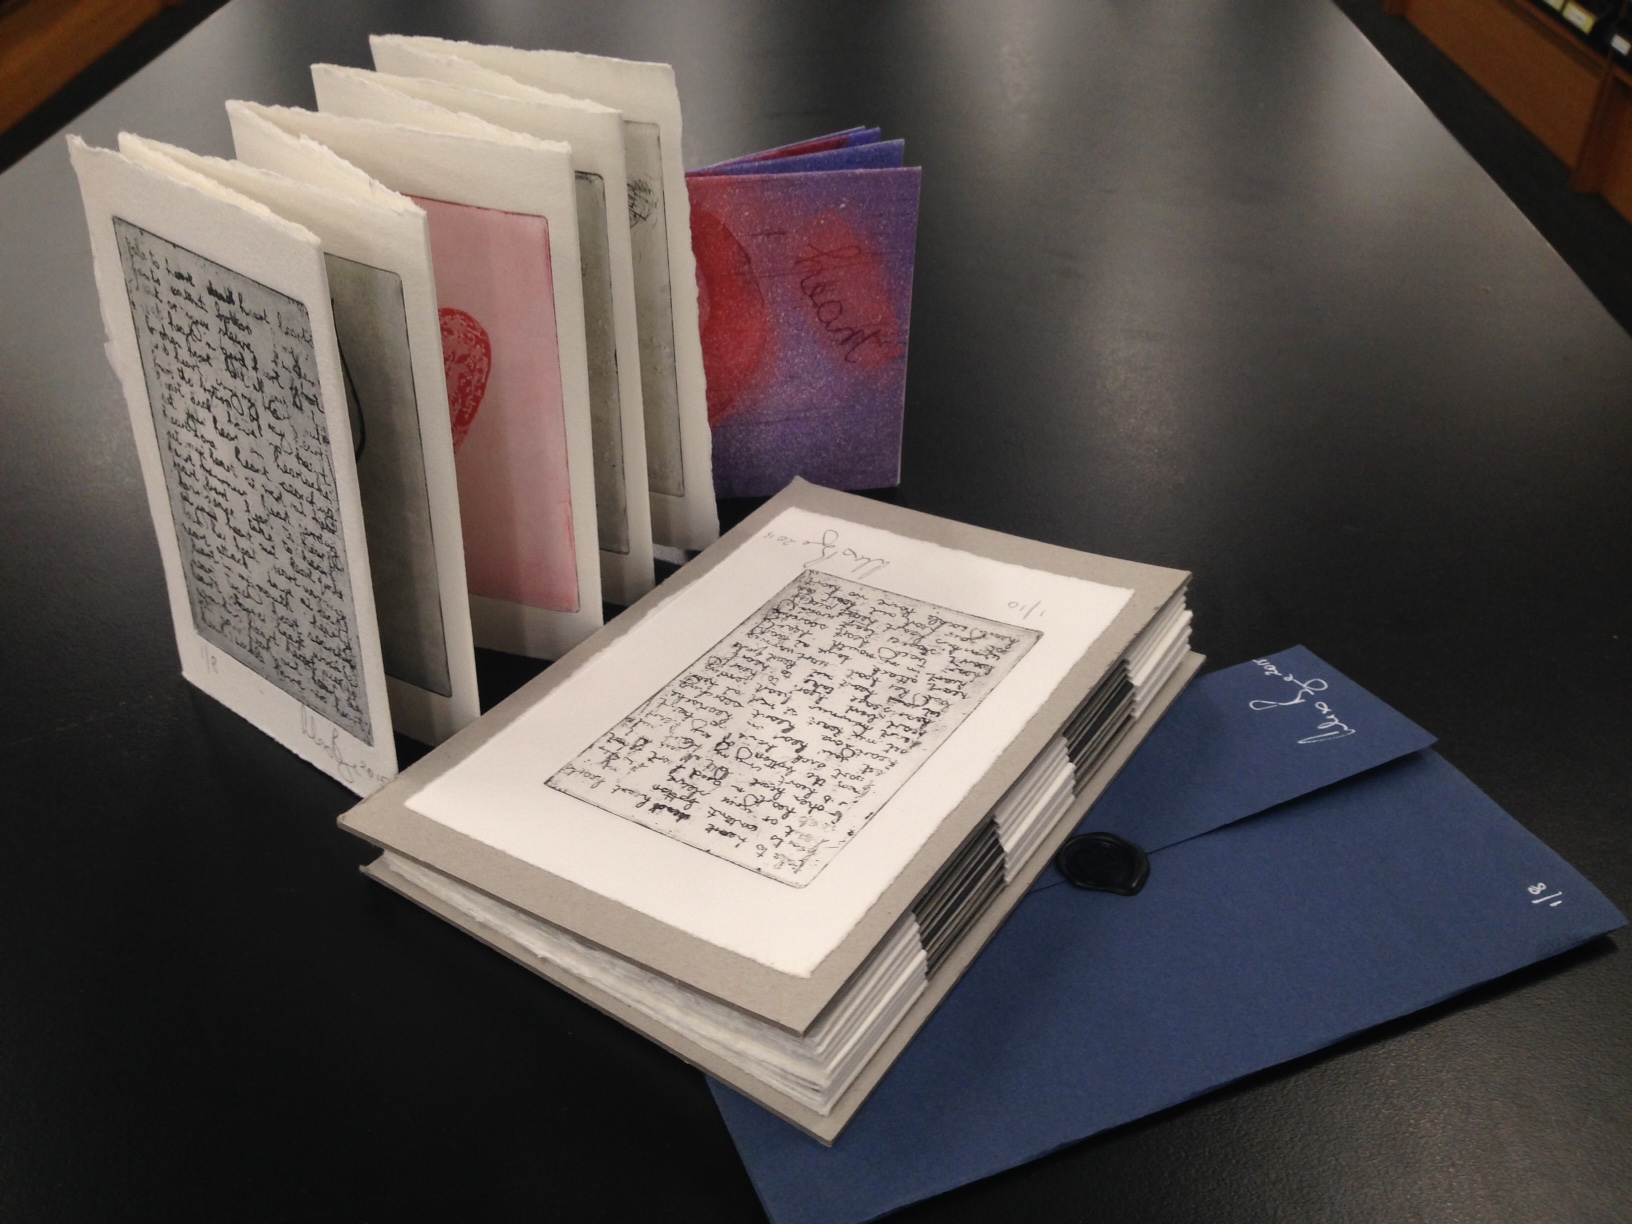 Four artists' books shown together on a table